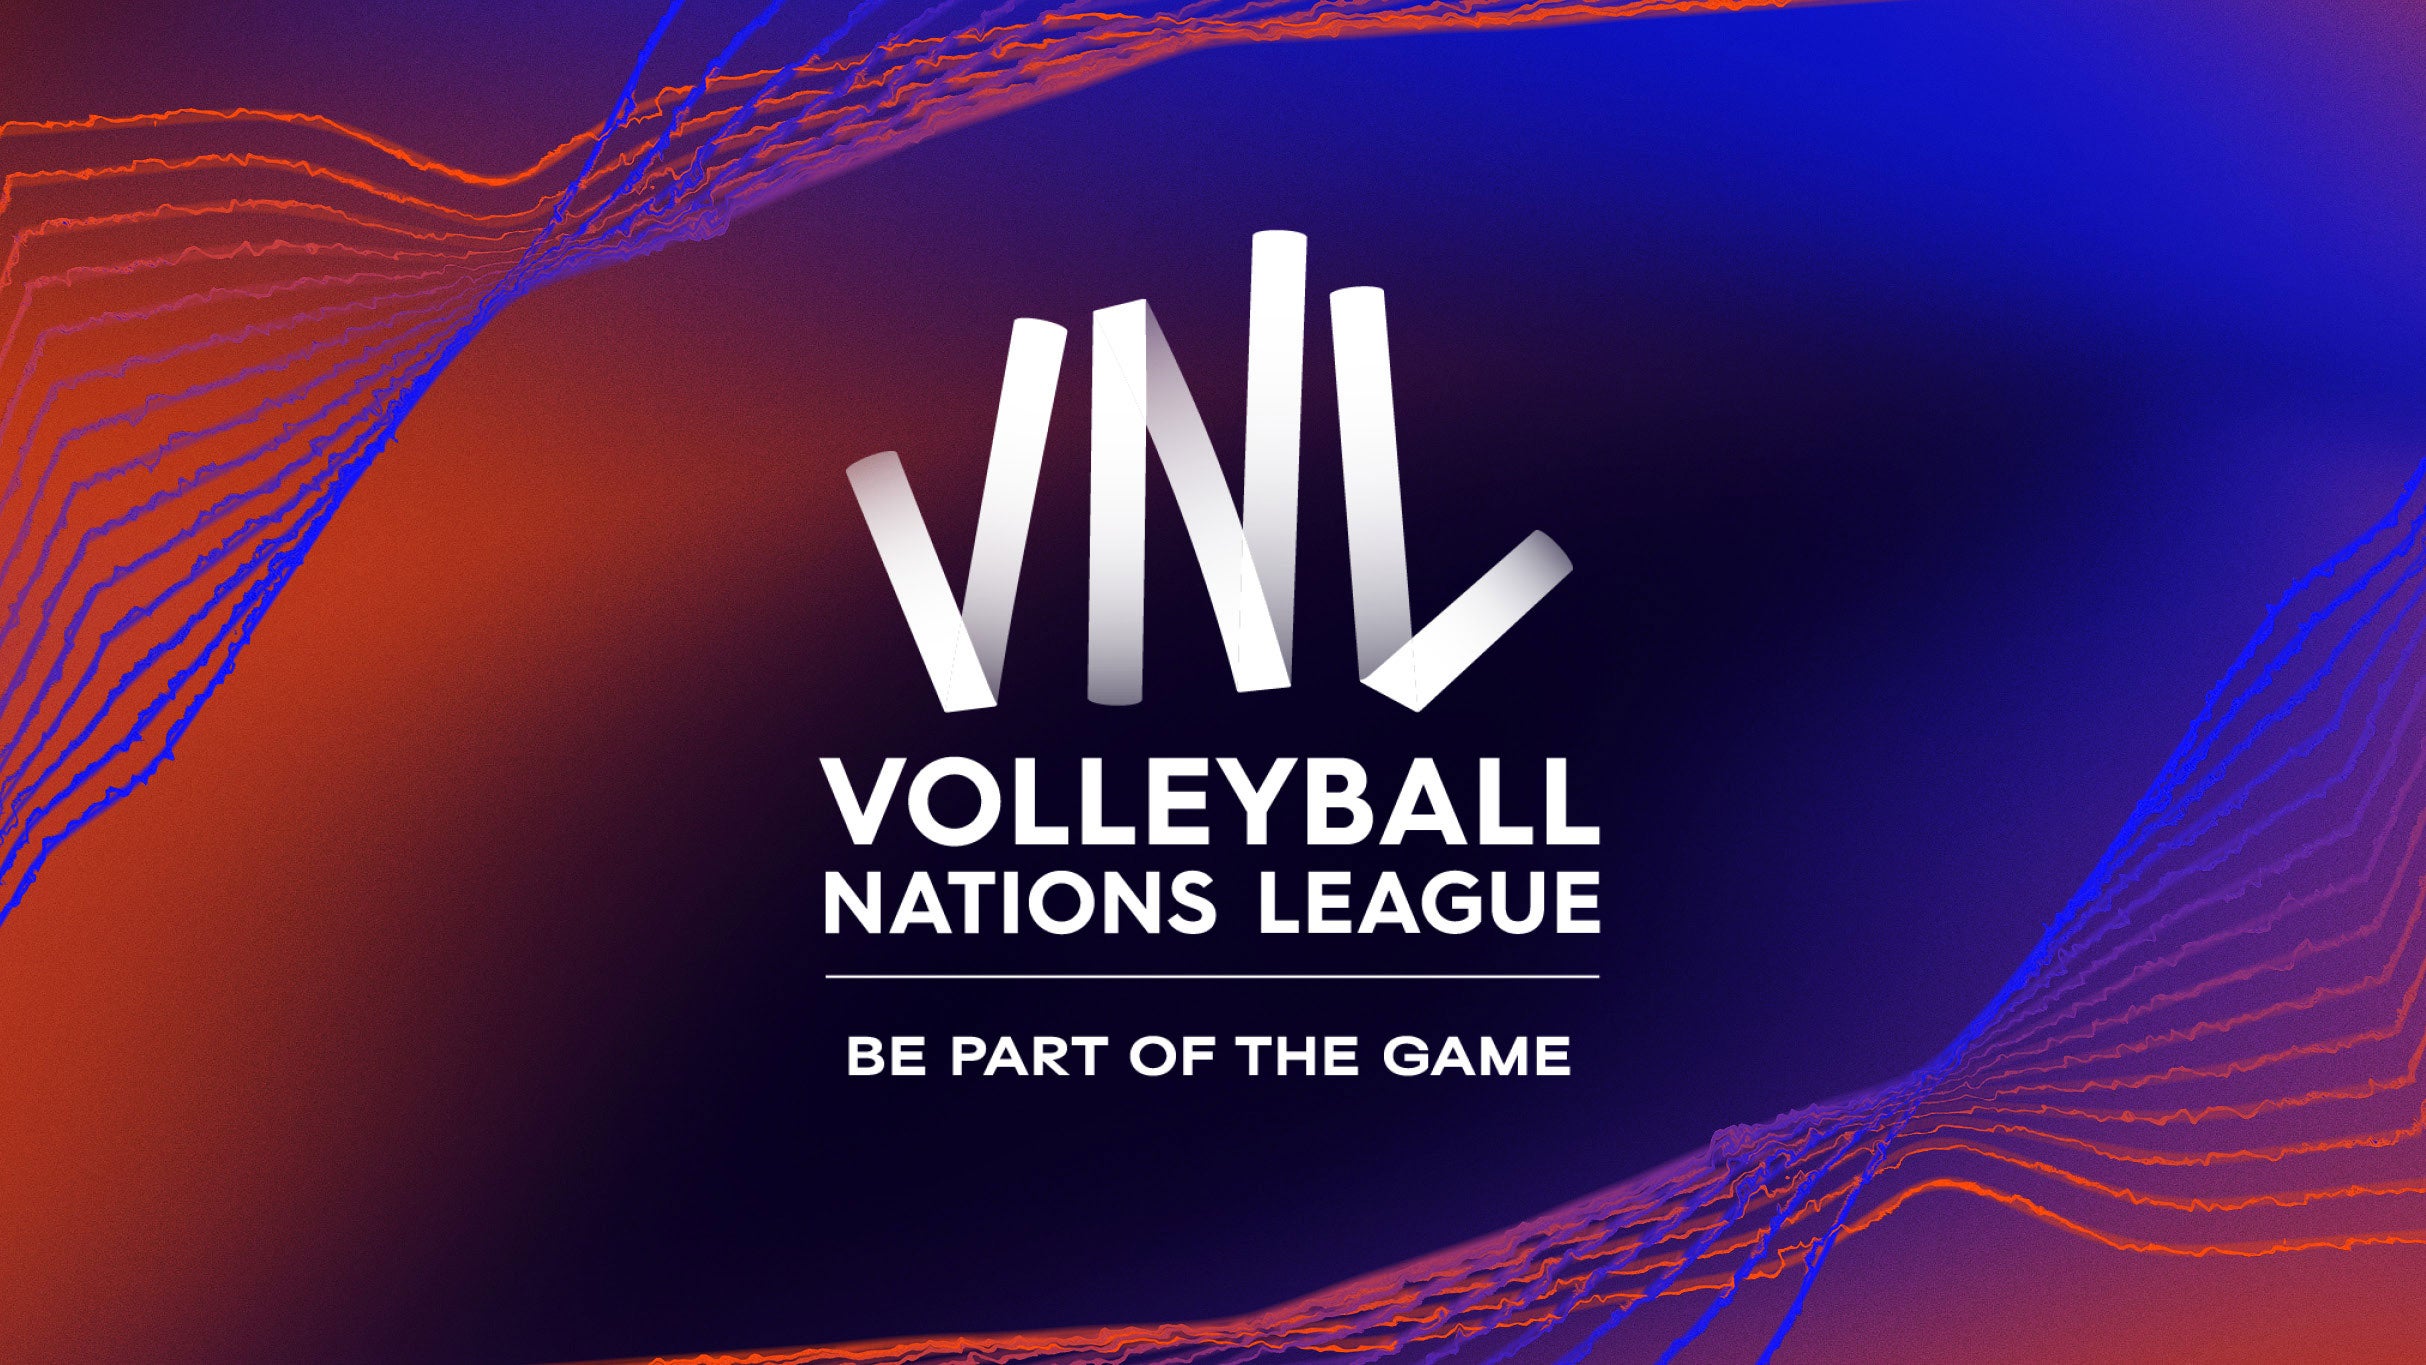 Volleyball Nations League - Match Day 6 presales in Ottawa